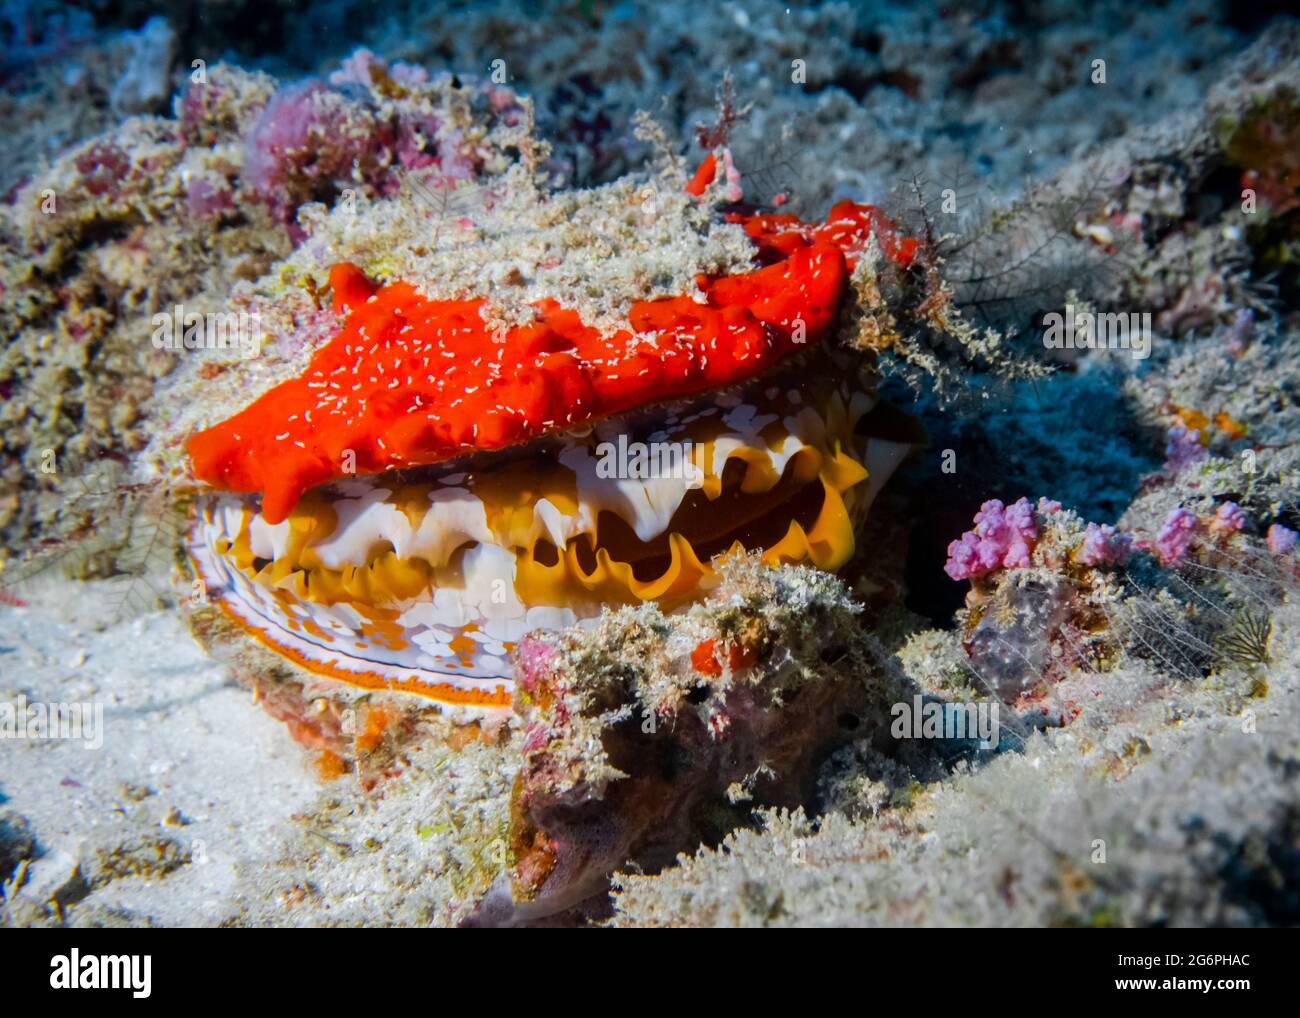 Bivalve mollusk Spondylus Varians (Thorny oyster) on a coral reef at the bottom of the Indian Ocean Stock Photo